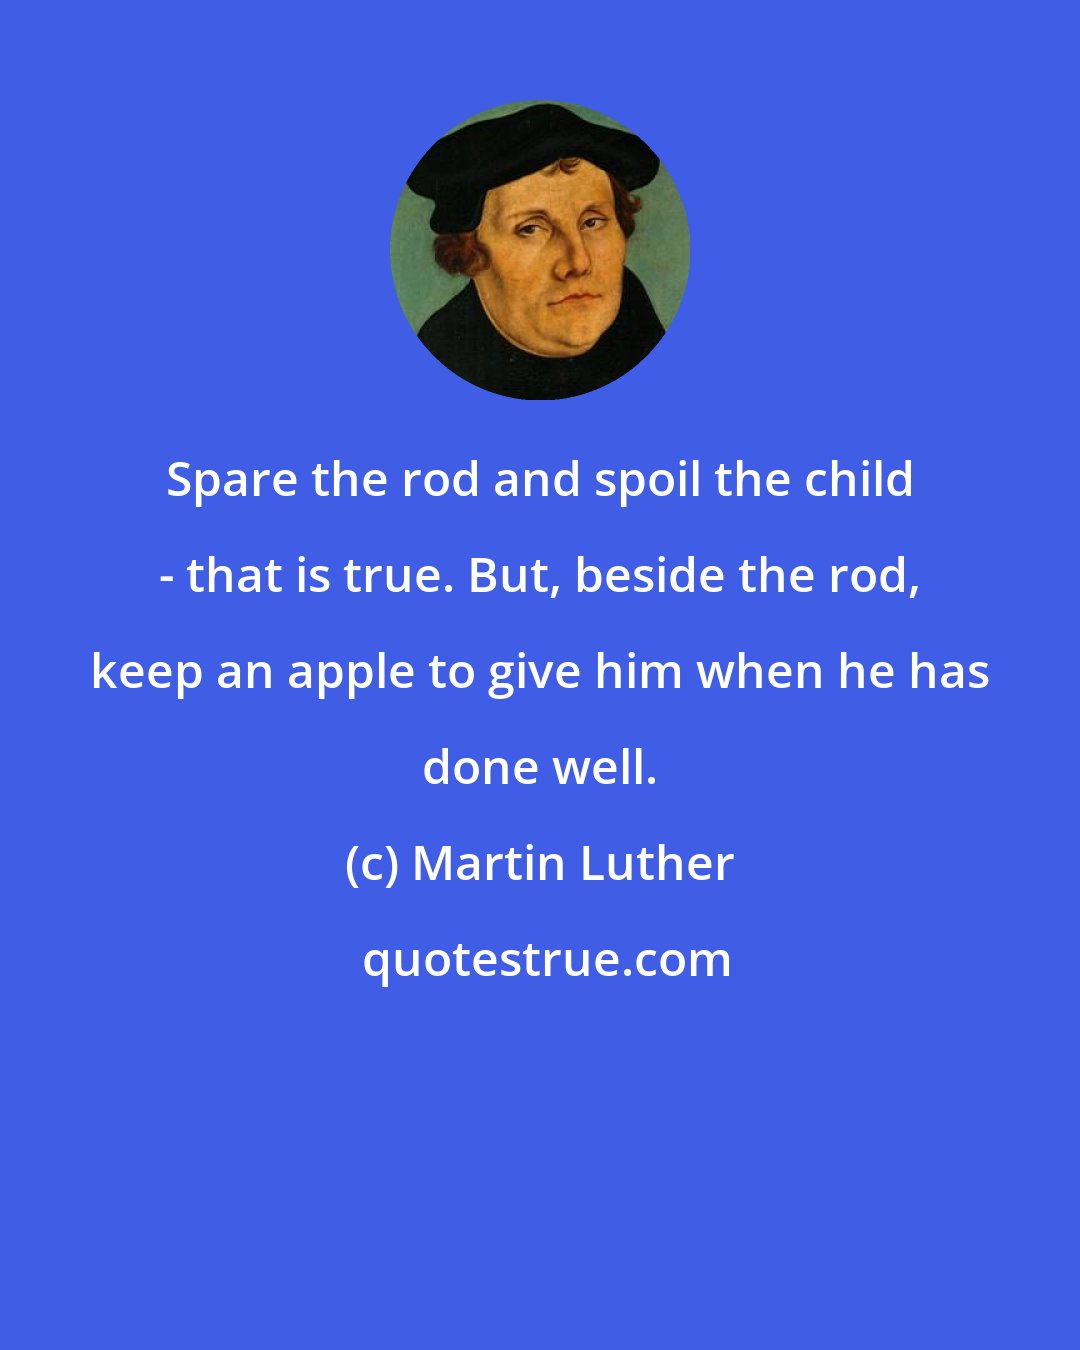 Martin Luther: Spare the rod and spoil the child - that is true. But, beside the rod, keep an apple to give him when he has done well.